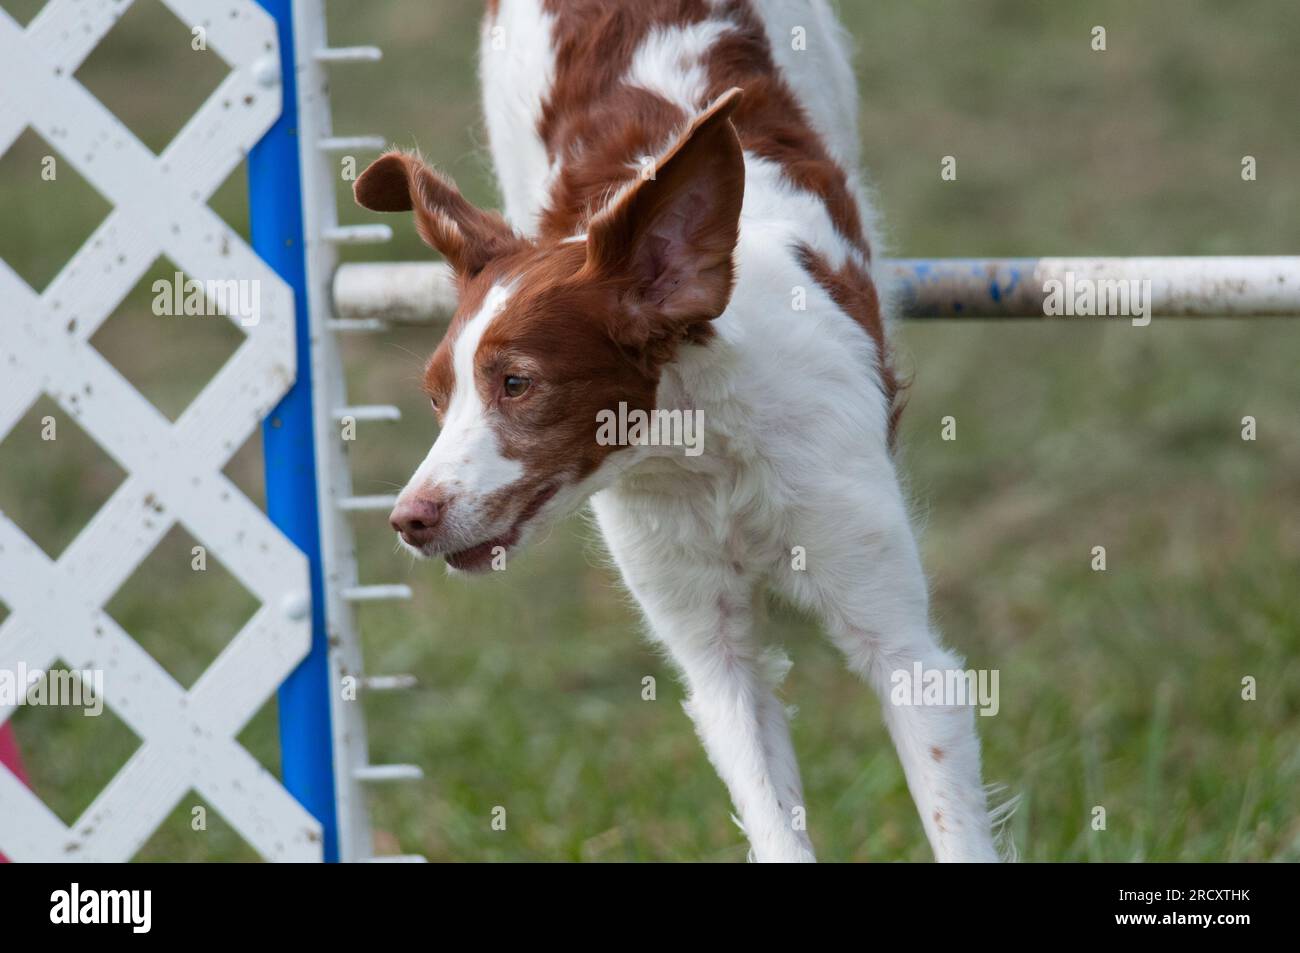 Brittany dog jumping over a hurdle during an agility competition Stock Photo